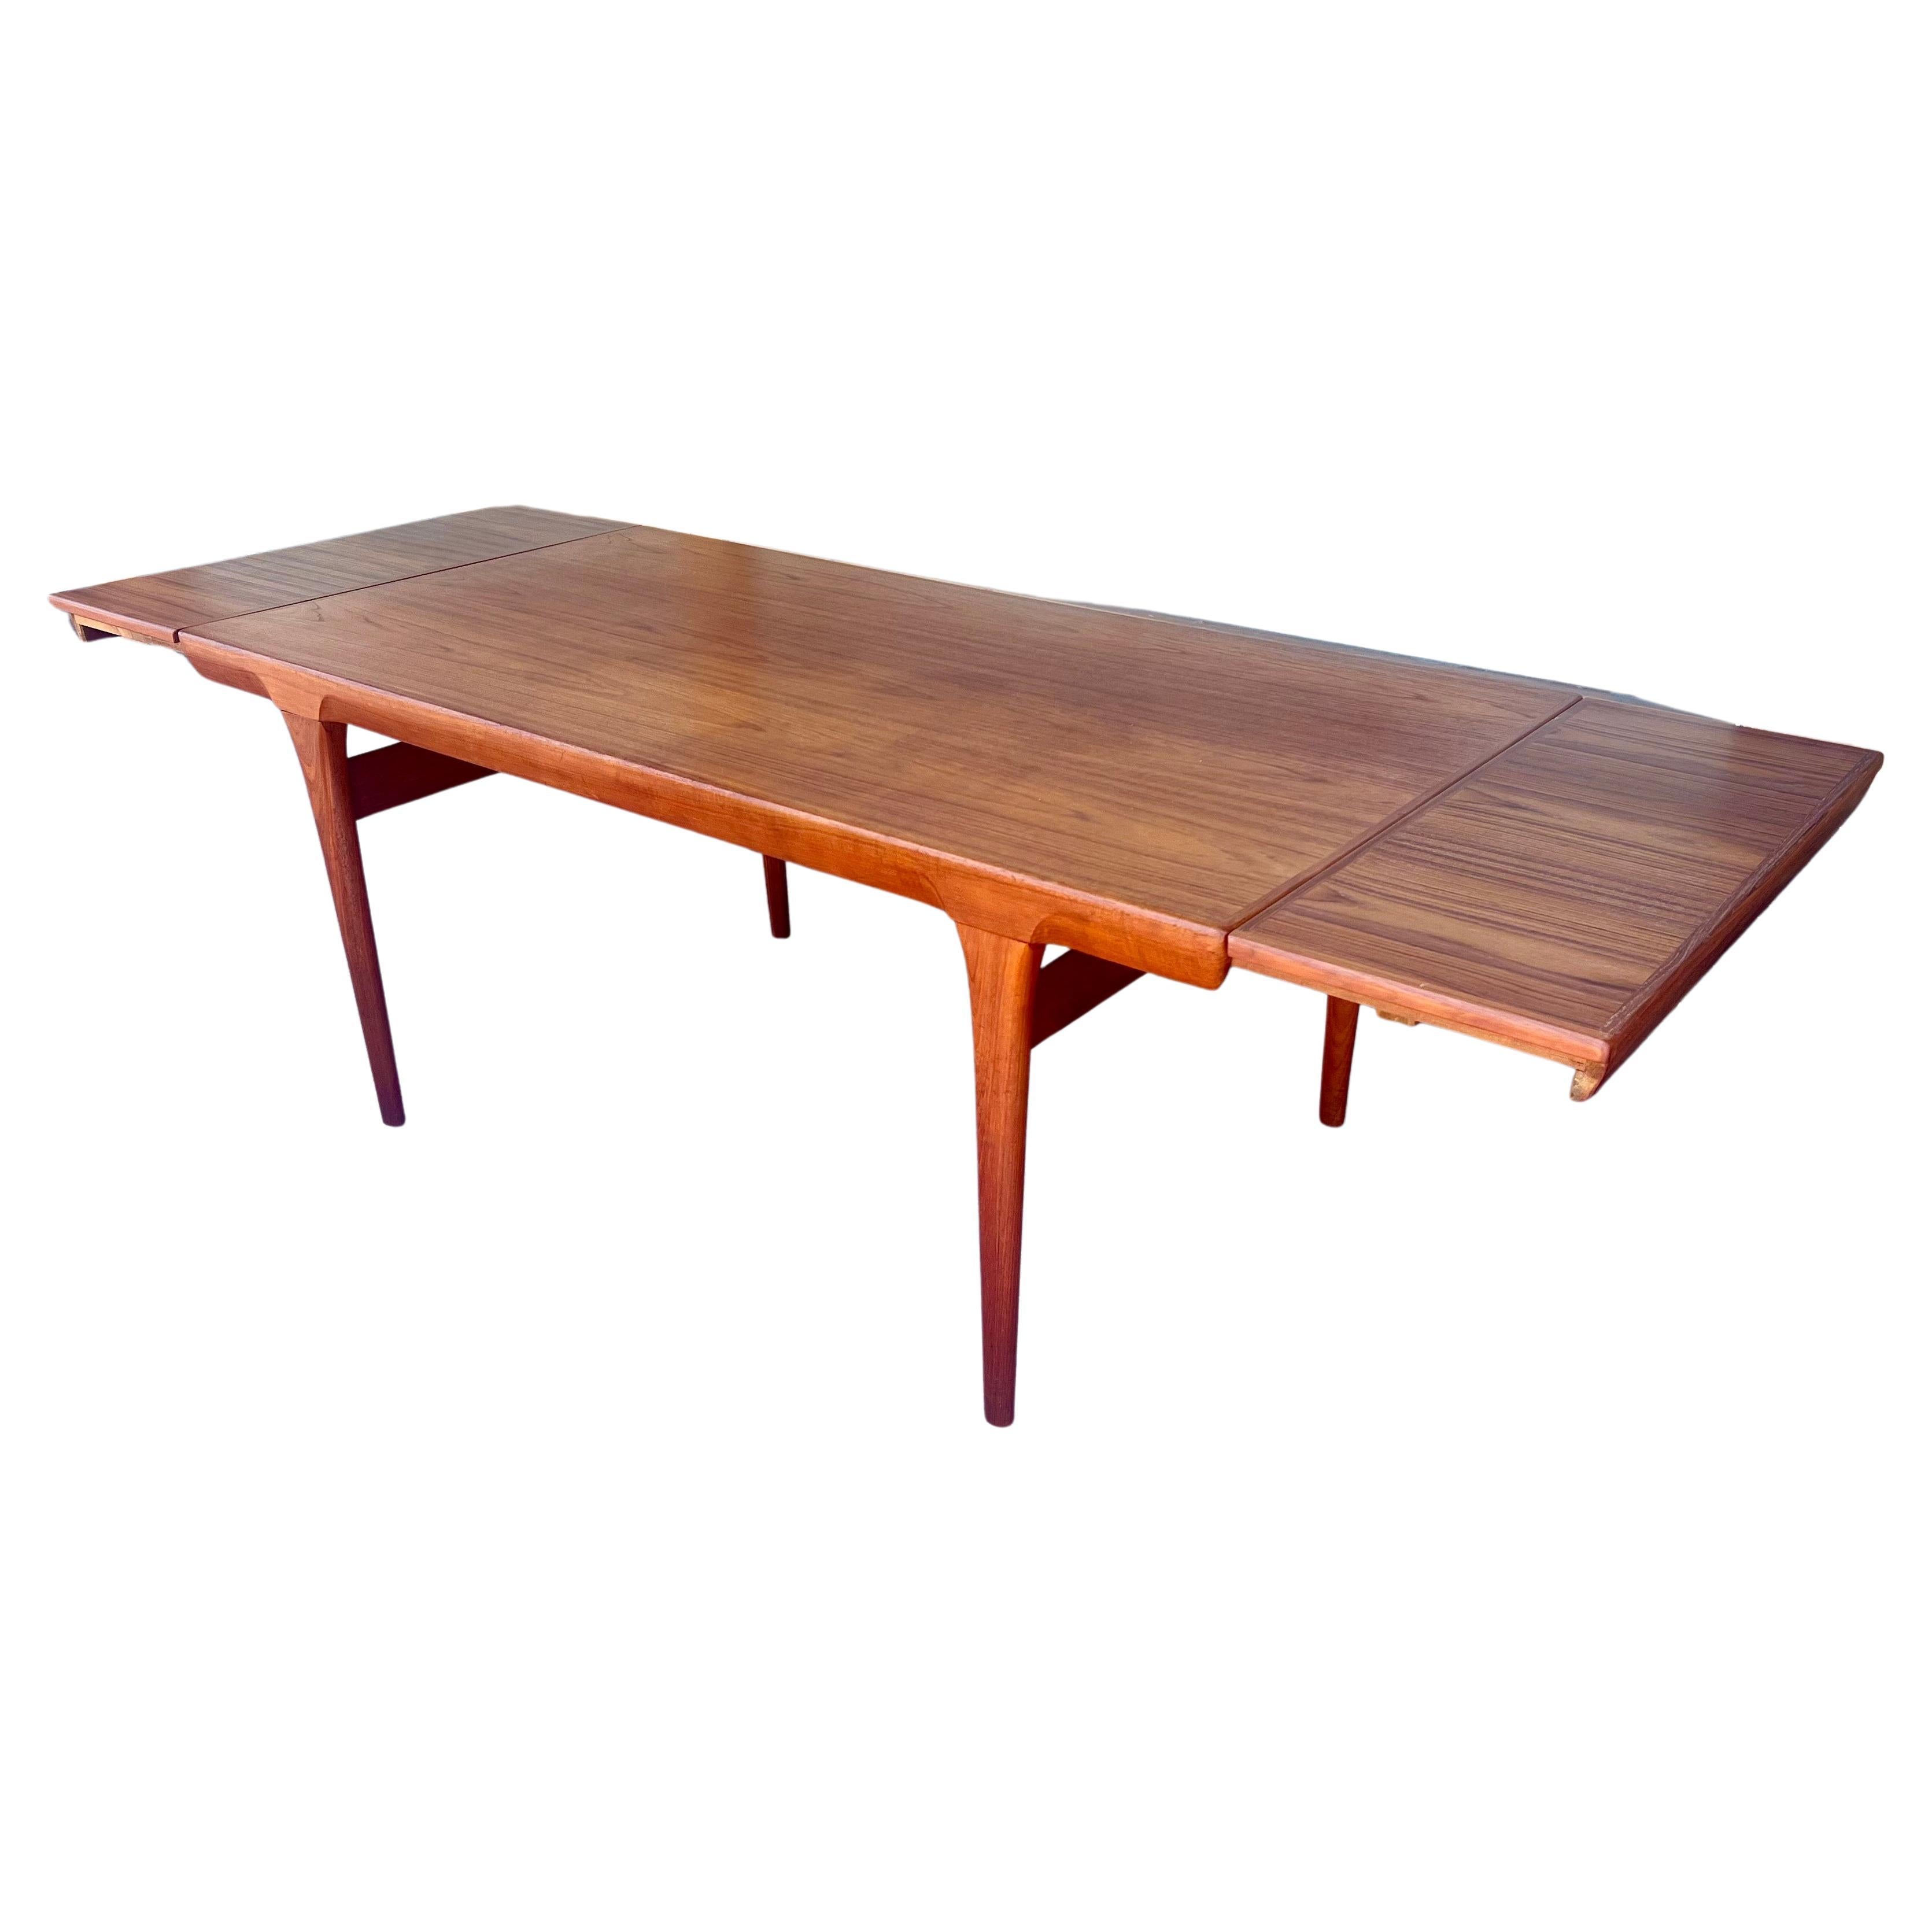 Danish Modern Teak Dining Table With 2 Pull-out Leaves by Johannes Andersen In Good Condition For Sale In San Diego, CA